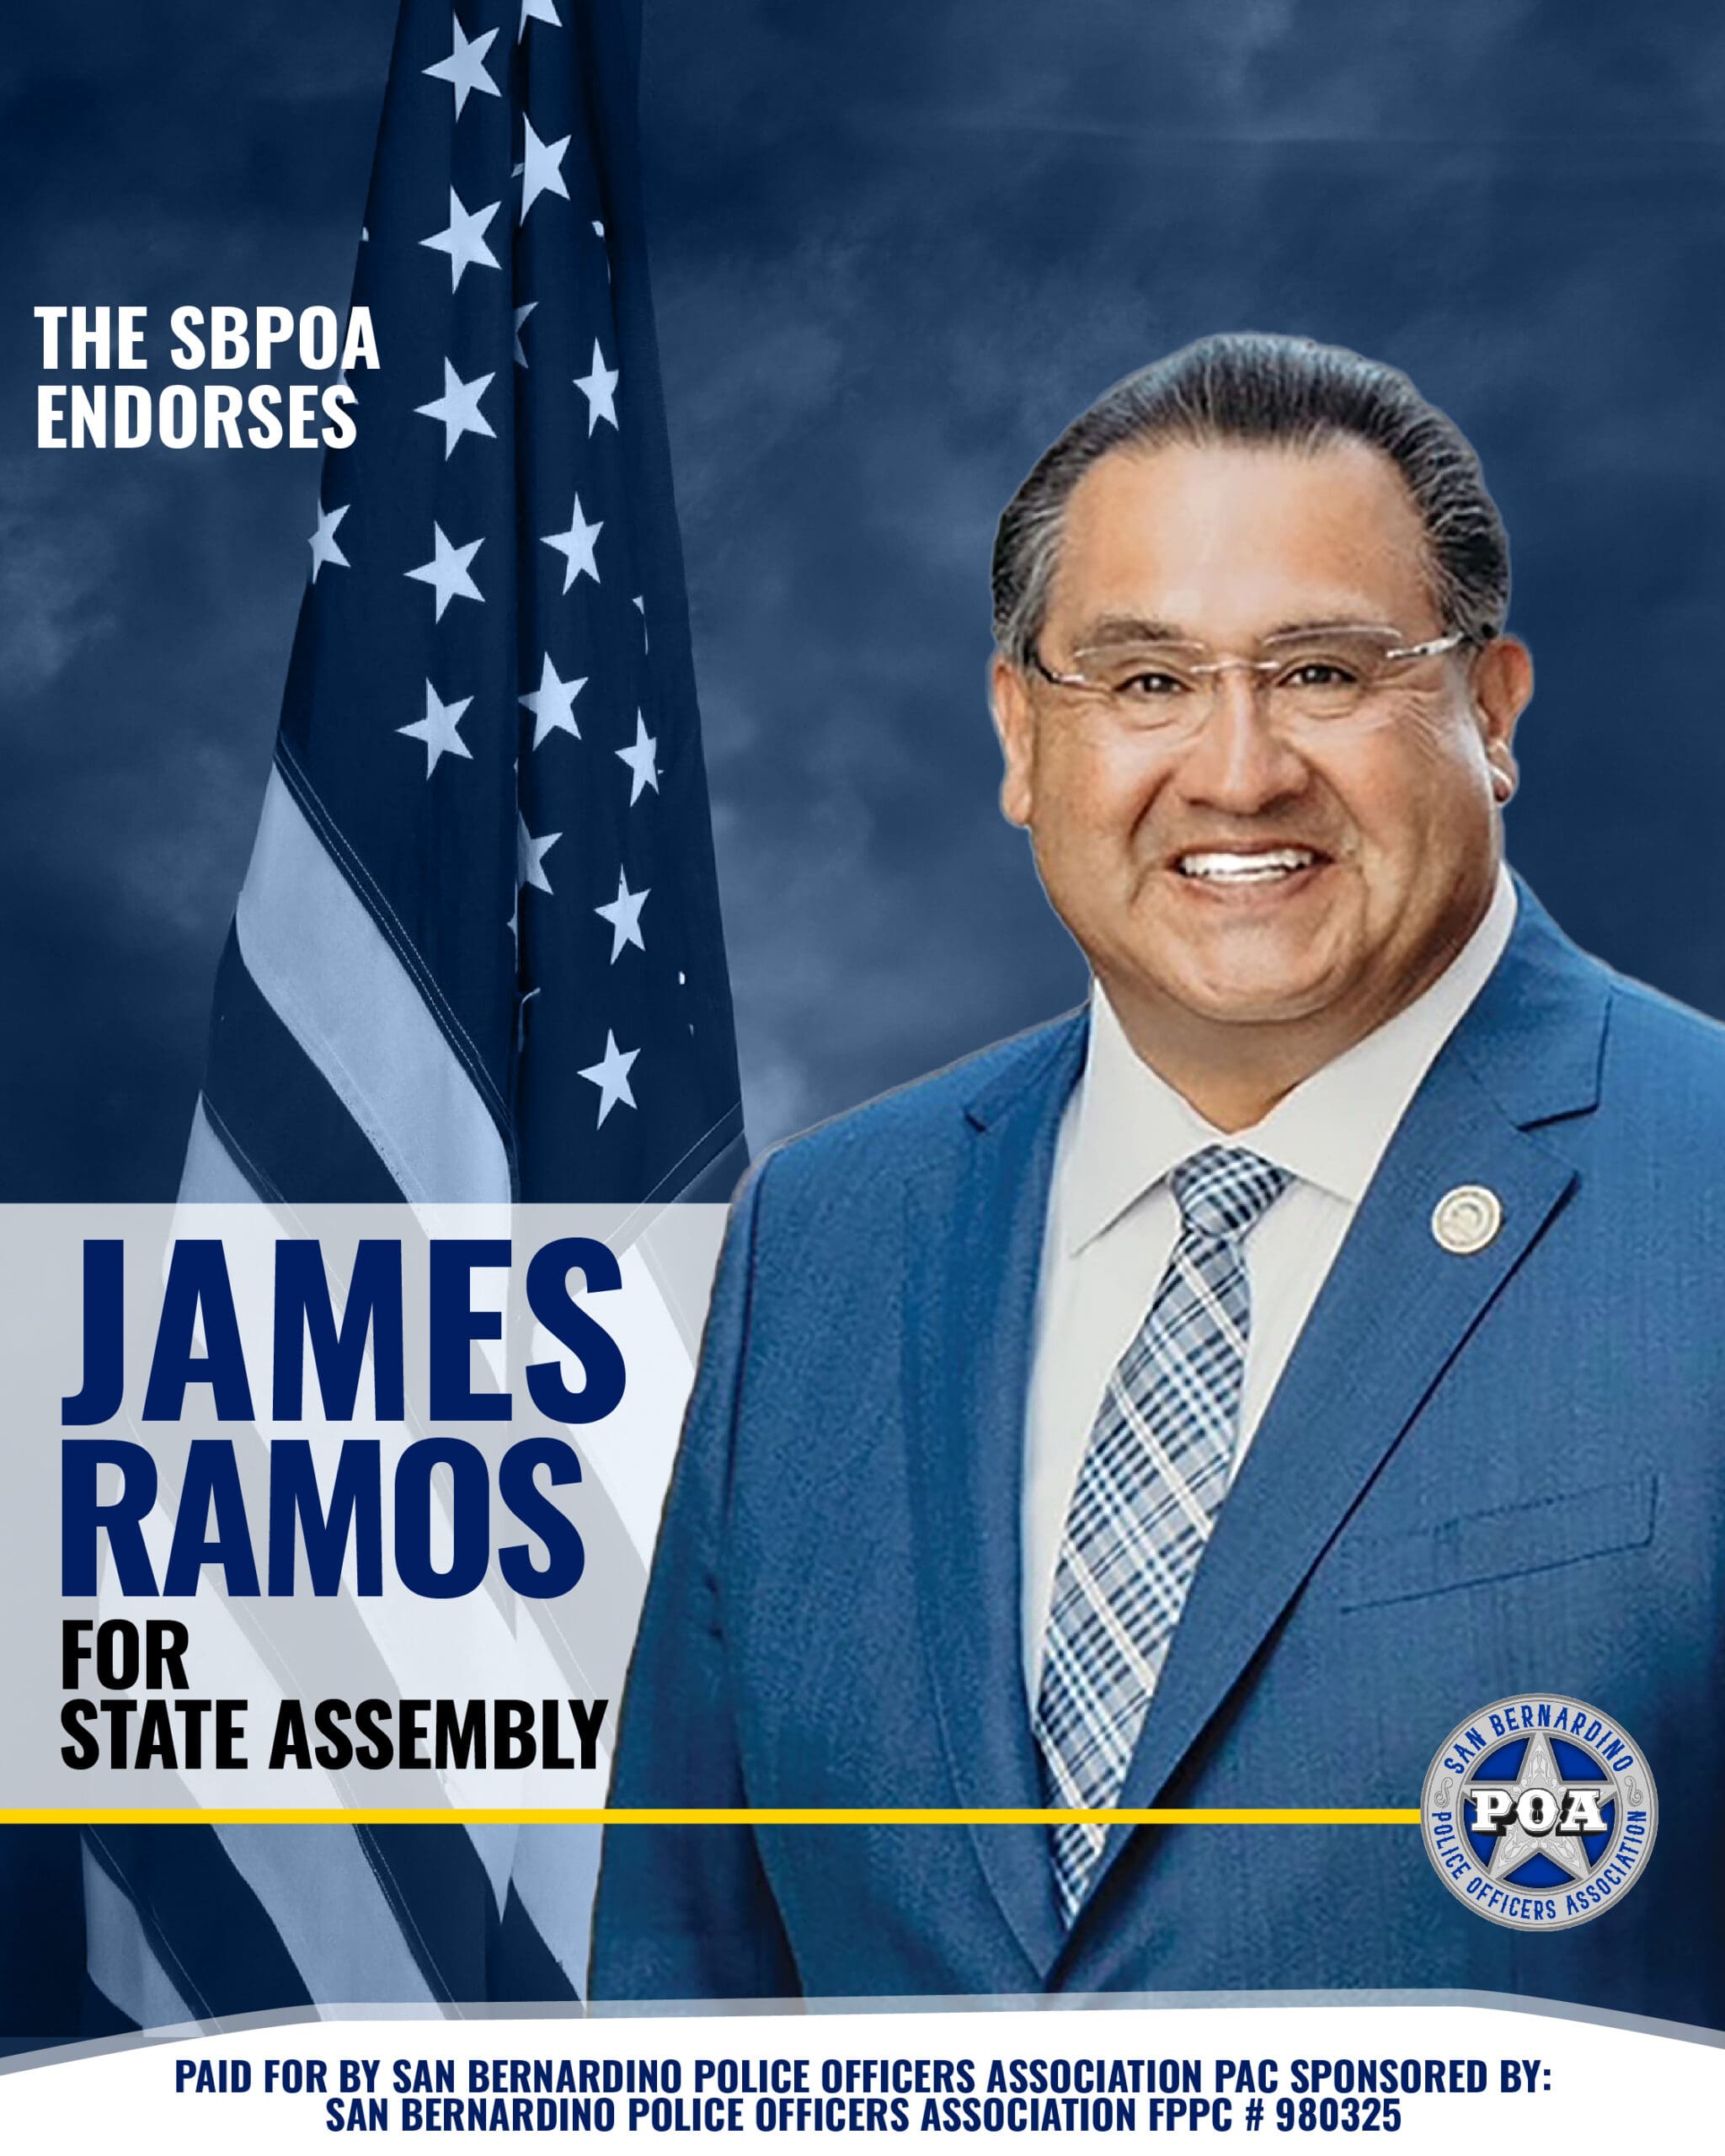 State Assemblyman Candidate James Ramos